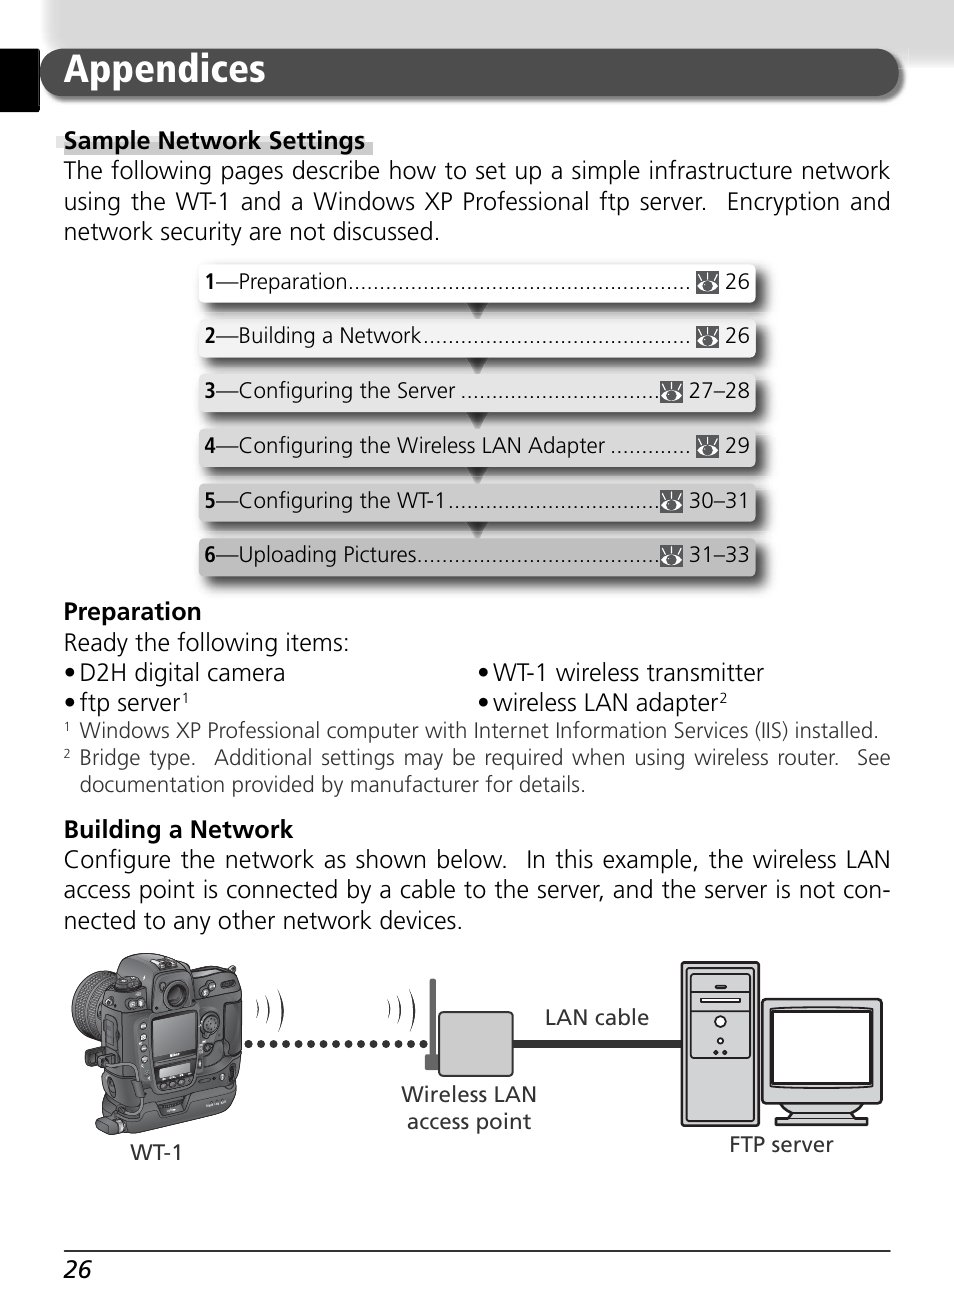 Appendices, Wireless lan adapter, Ftp server | Wt-1 lan cable wireless lan access point | Nikon WT-1 User Manual | Page 33 / 137